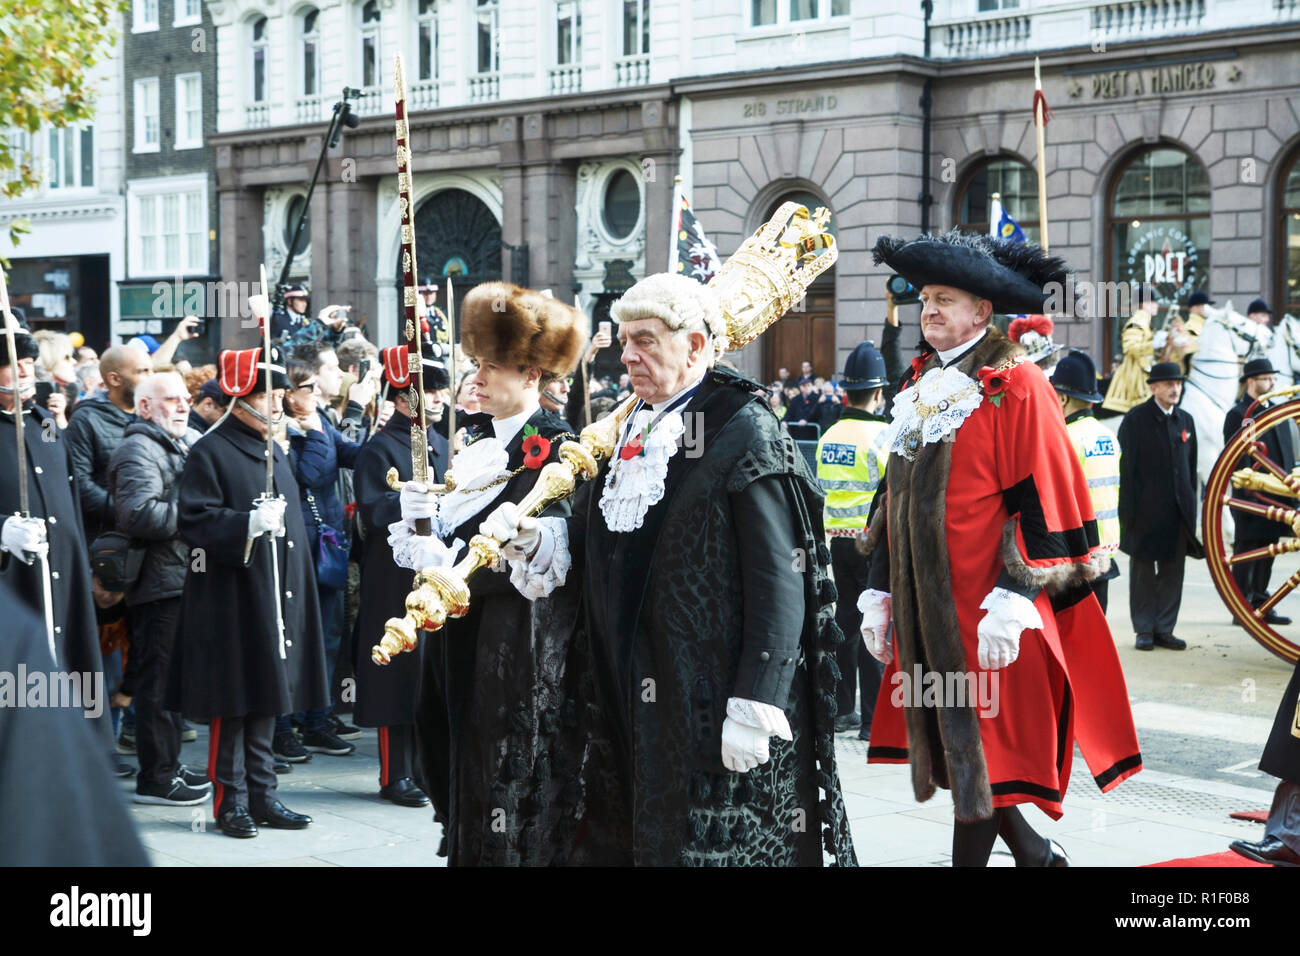 A day in the life of The Lord Mayor of London, Peter Estlin, at the Lord Mayors Show 2018, in the City of London. Stock Photo